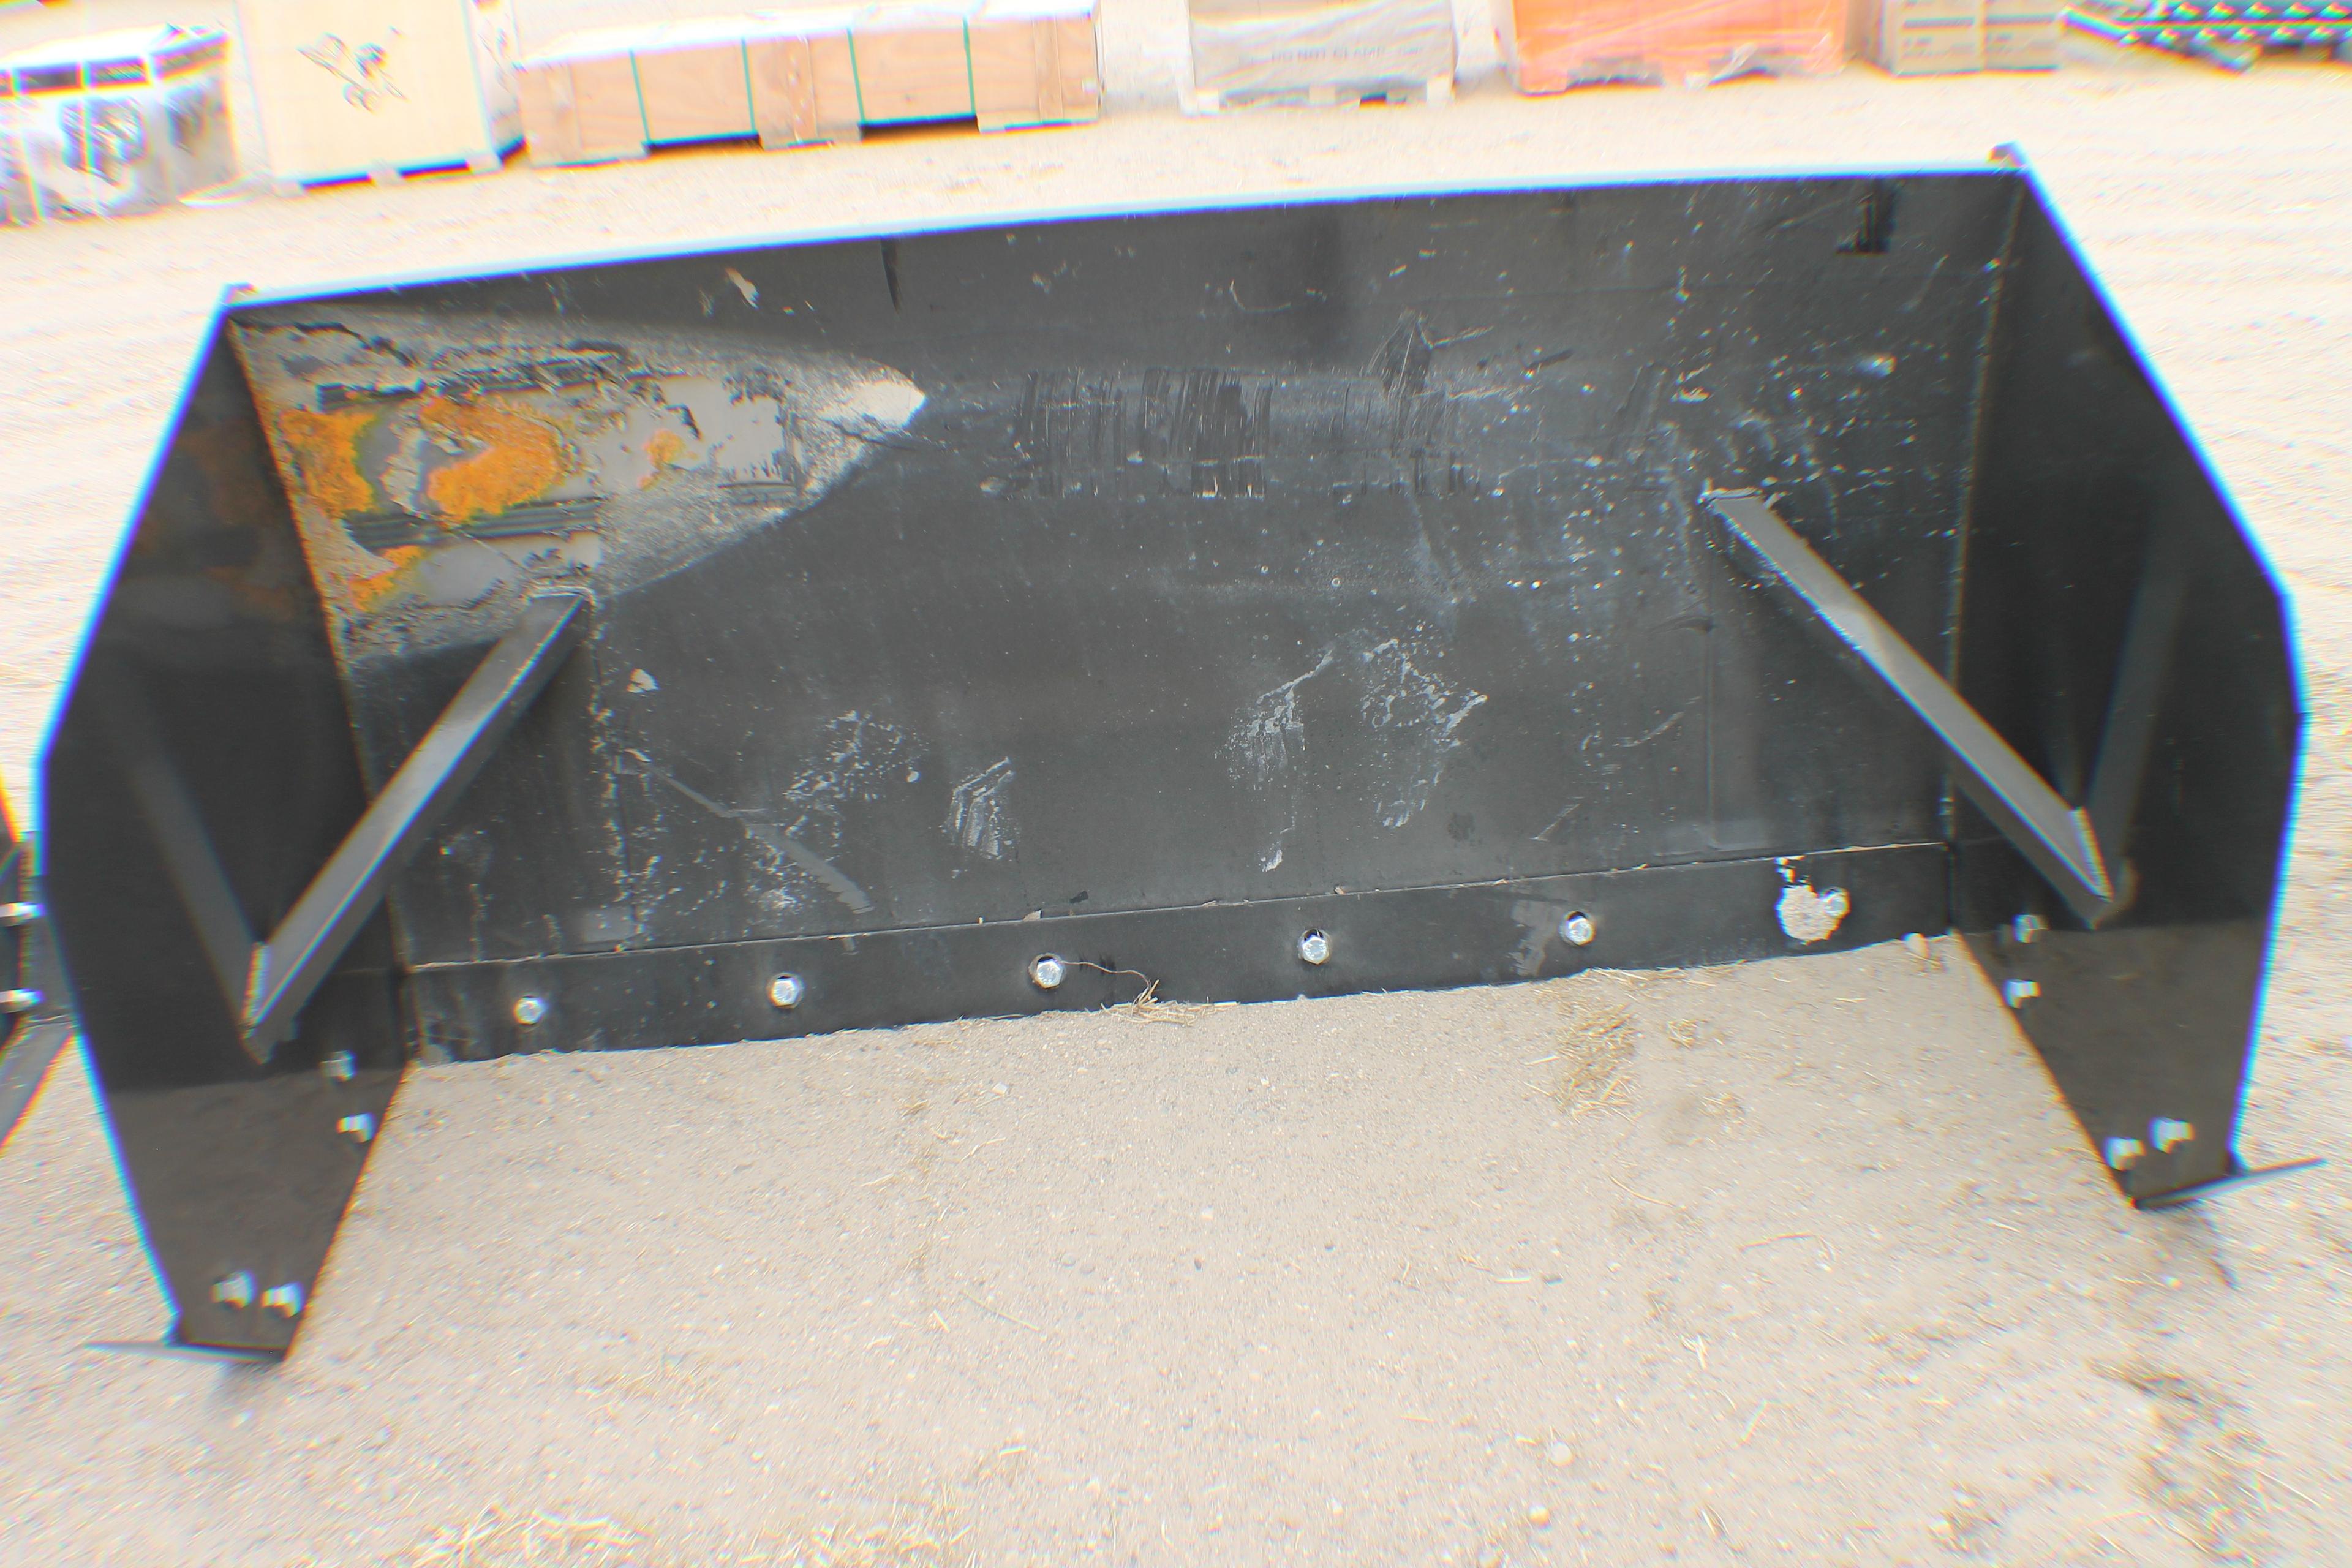 403. 413, Unused 72 Inch Snow Pusher with Skid Loader Back Plate, Tax